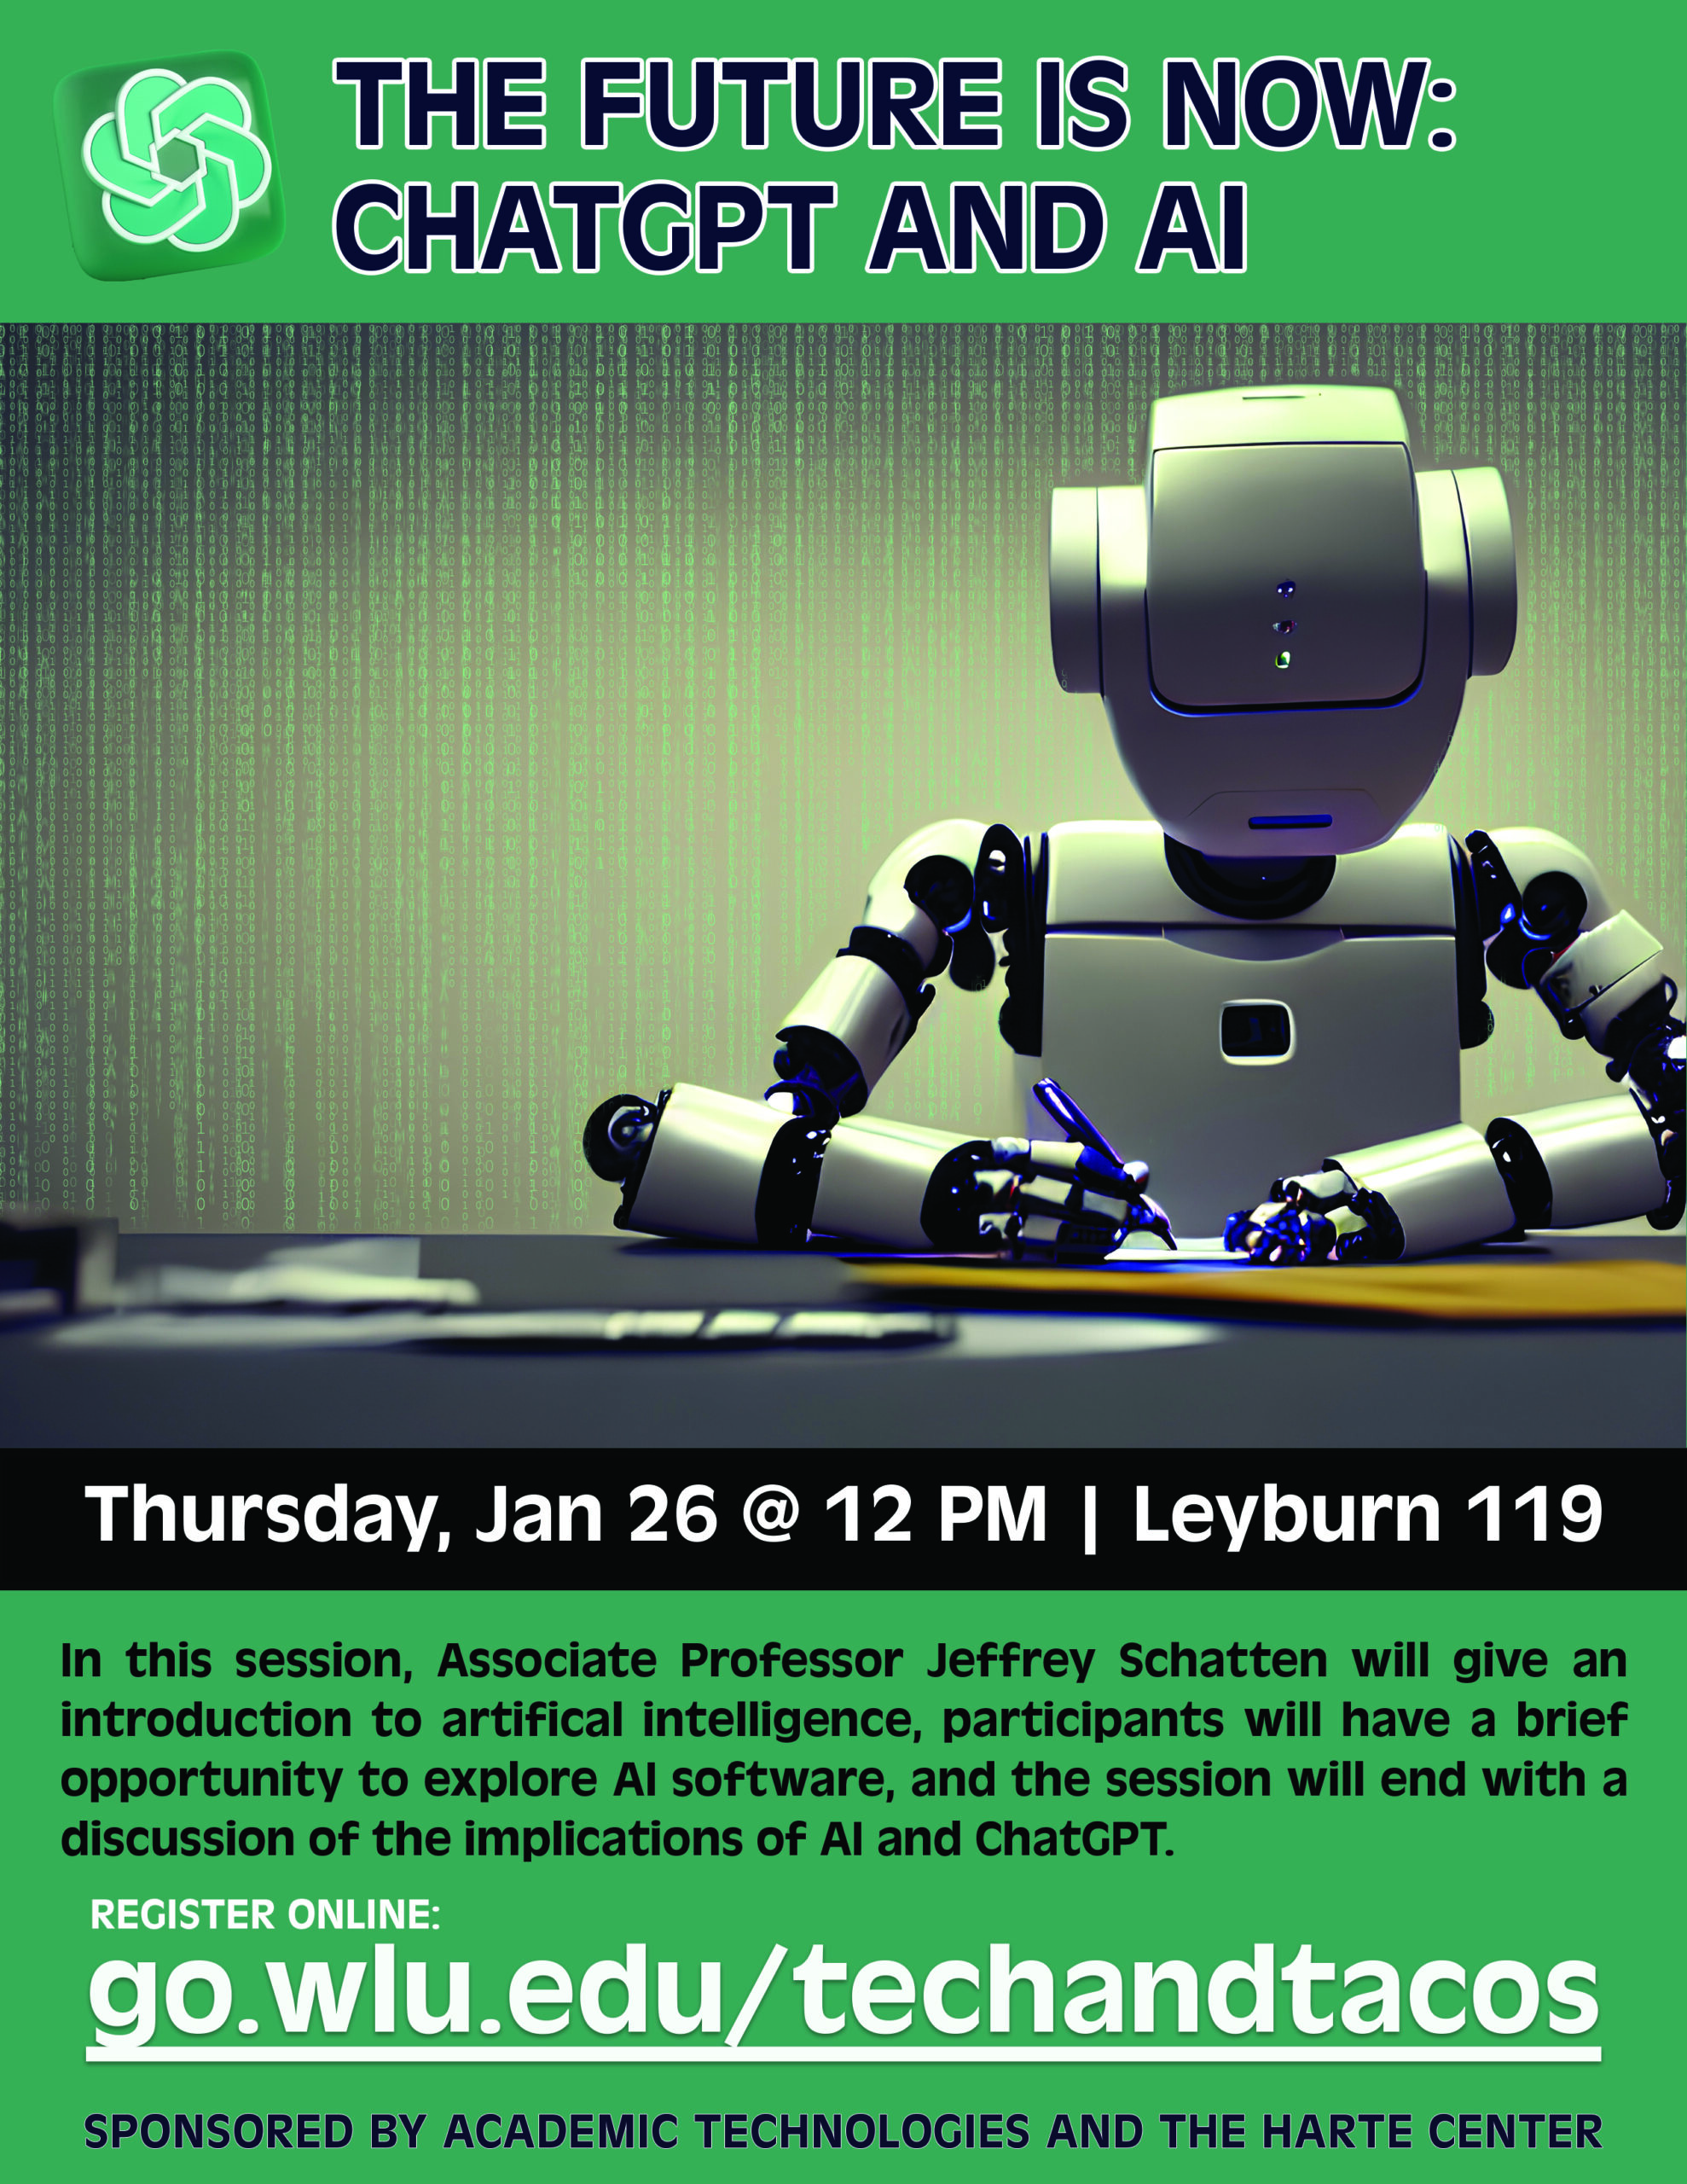 Robot seated at a table, writing with a pen. Thursday, Jan 26 @ 12 PM | Leyburn 119. In this session, Associate Professor Jeffrey Schatten will give an introduction to the topic, participants will have a brief opportunity to explore the software, and the session will end with a discussion of the implications of AI and ChatGPT. Sign up at go.wlu.edu/techandtacos.